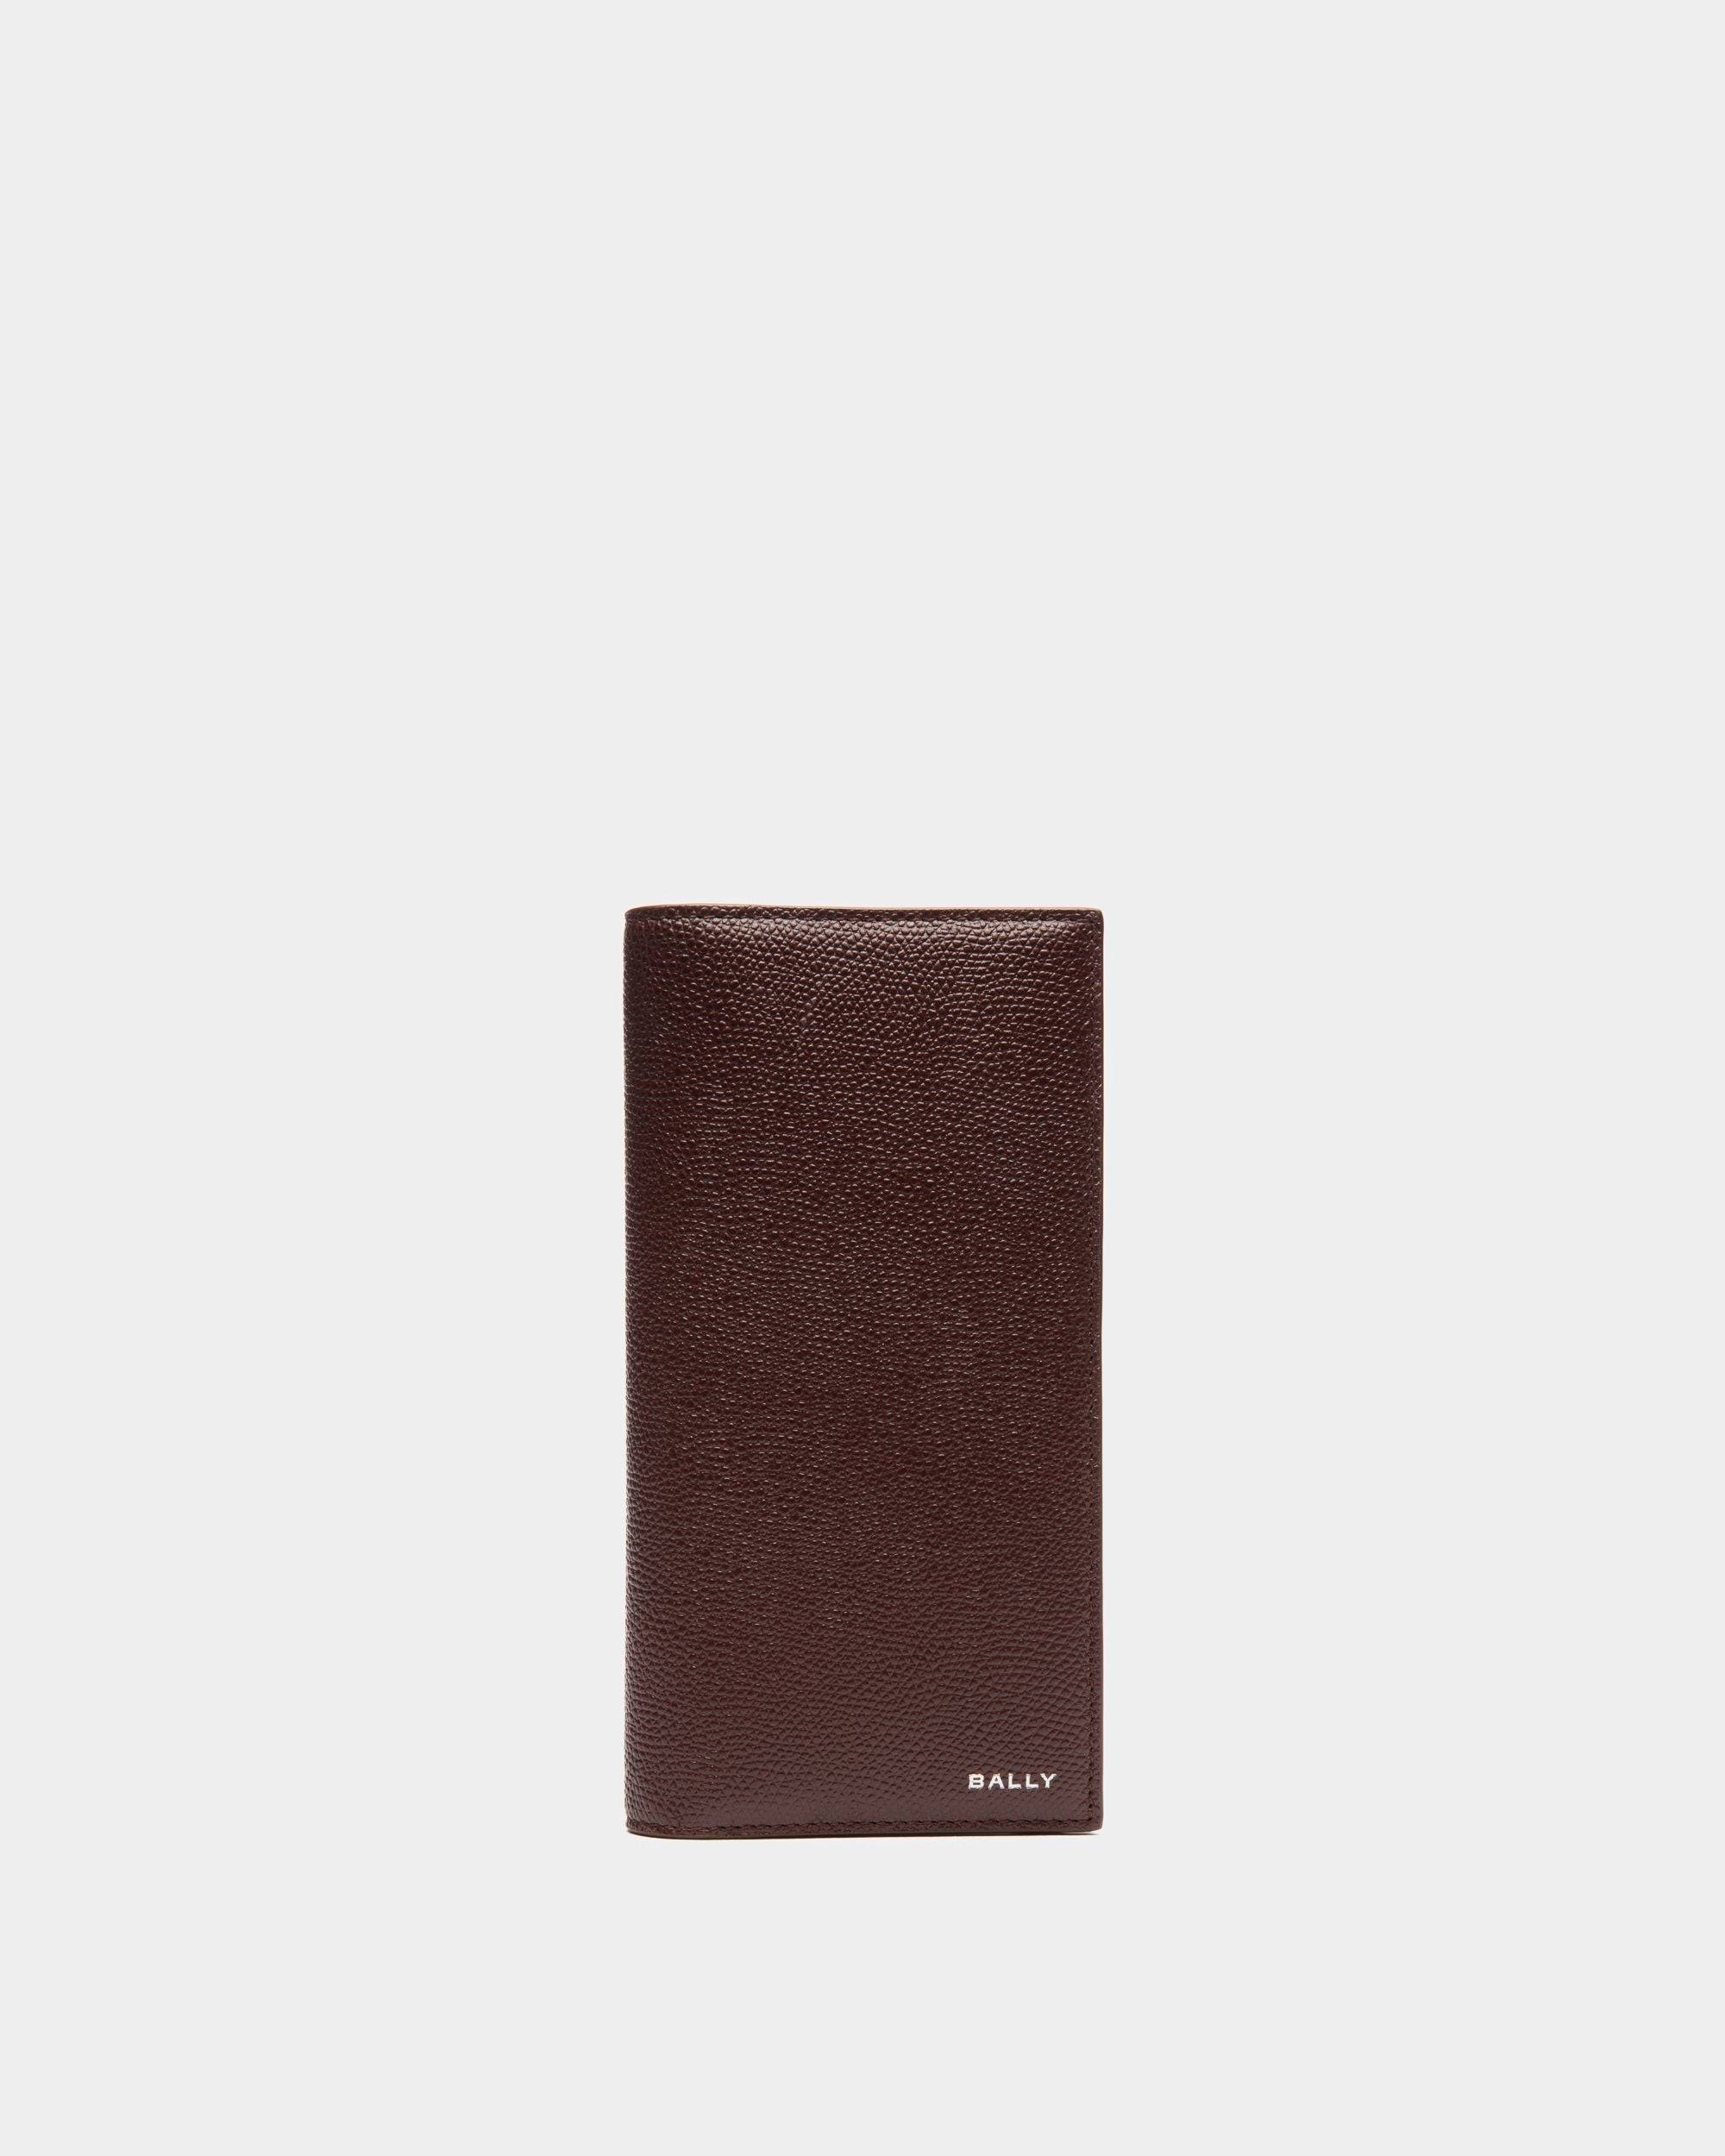 Men's Flag Continental Wallet In Chestnut Brown Grained Leather | Bally | Still Life Front